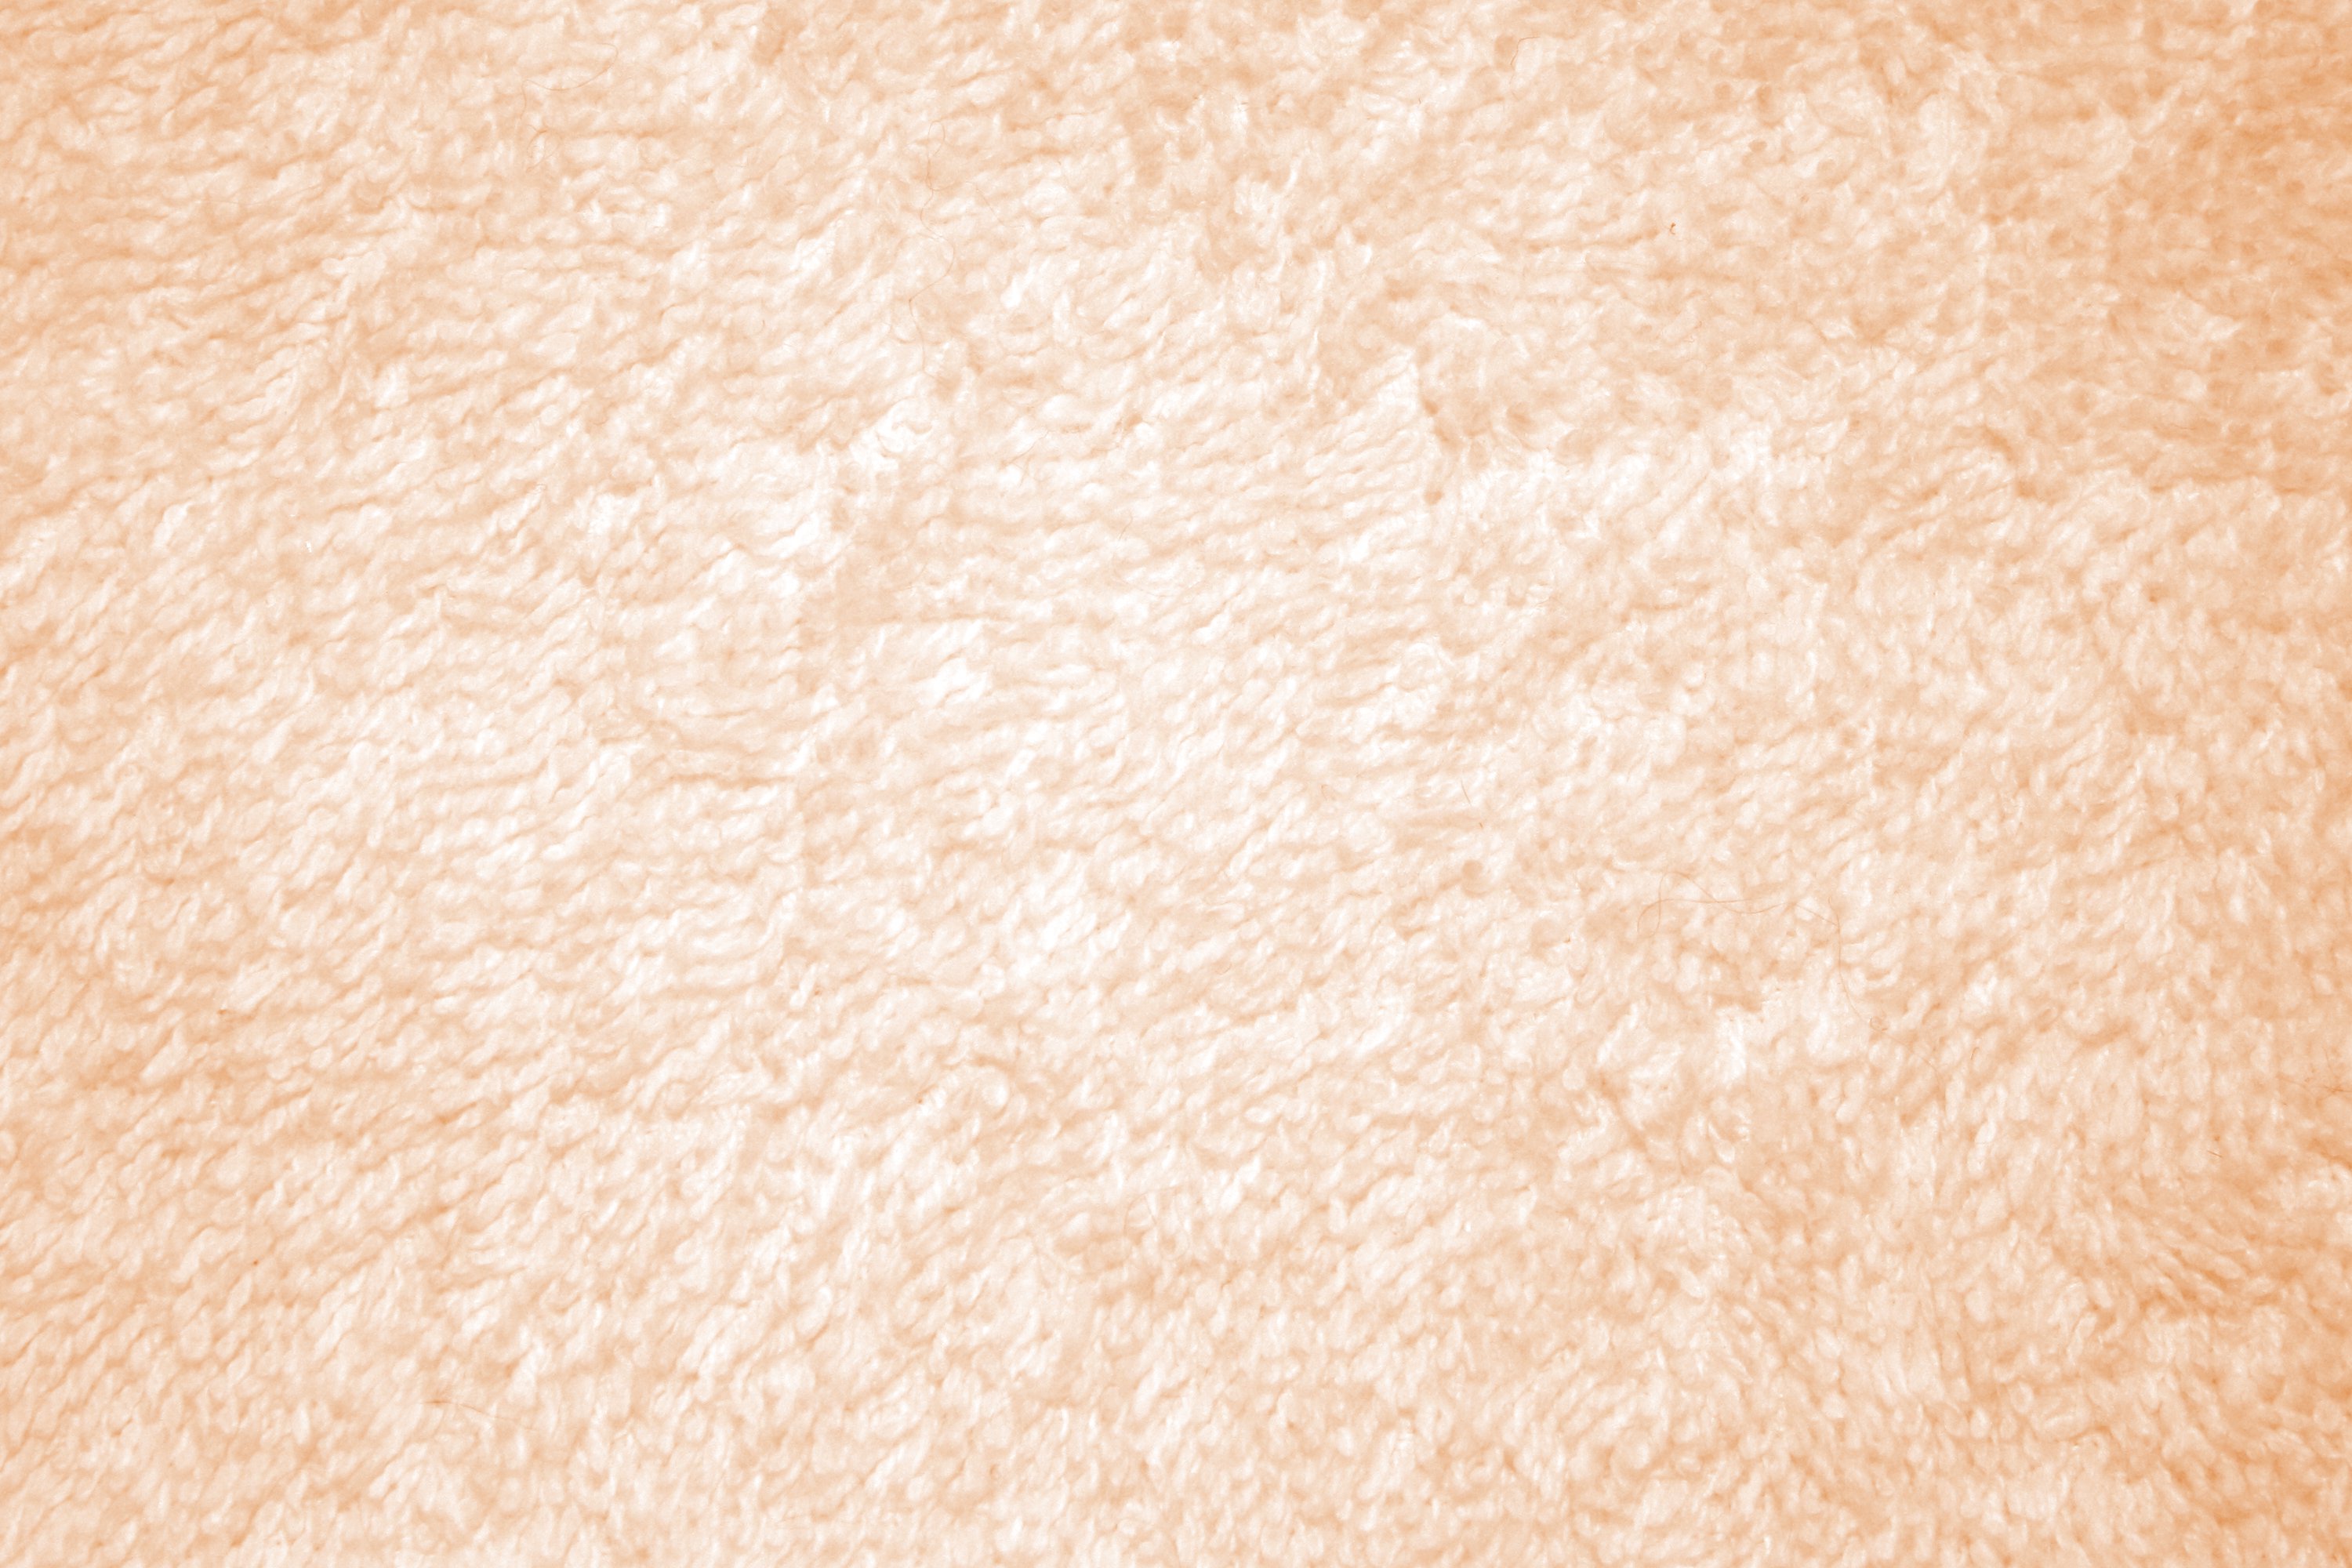 Peach Colored Terry Cloth Texture Picture Free Photograph Photos